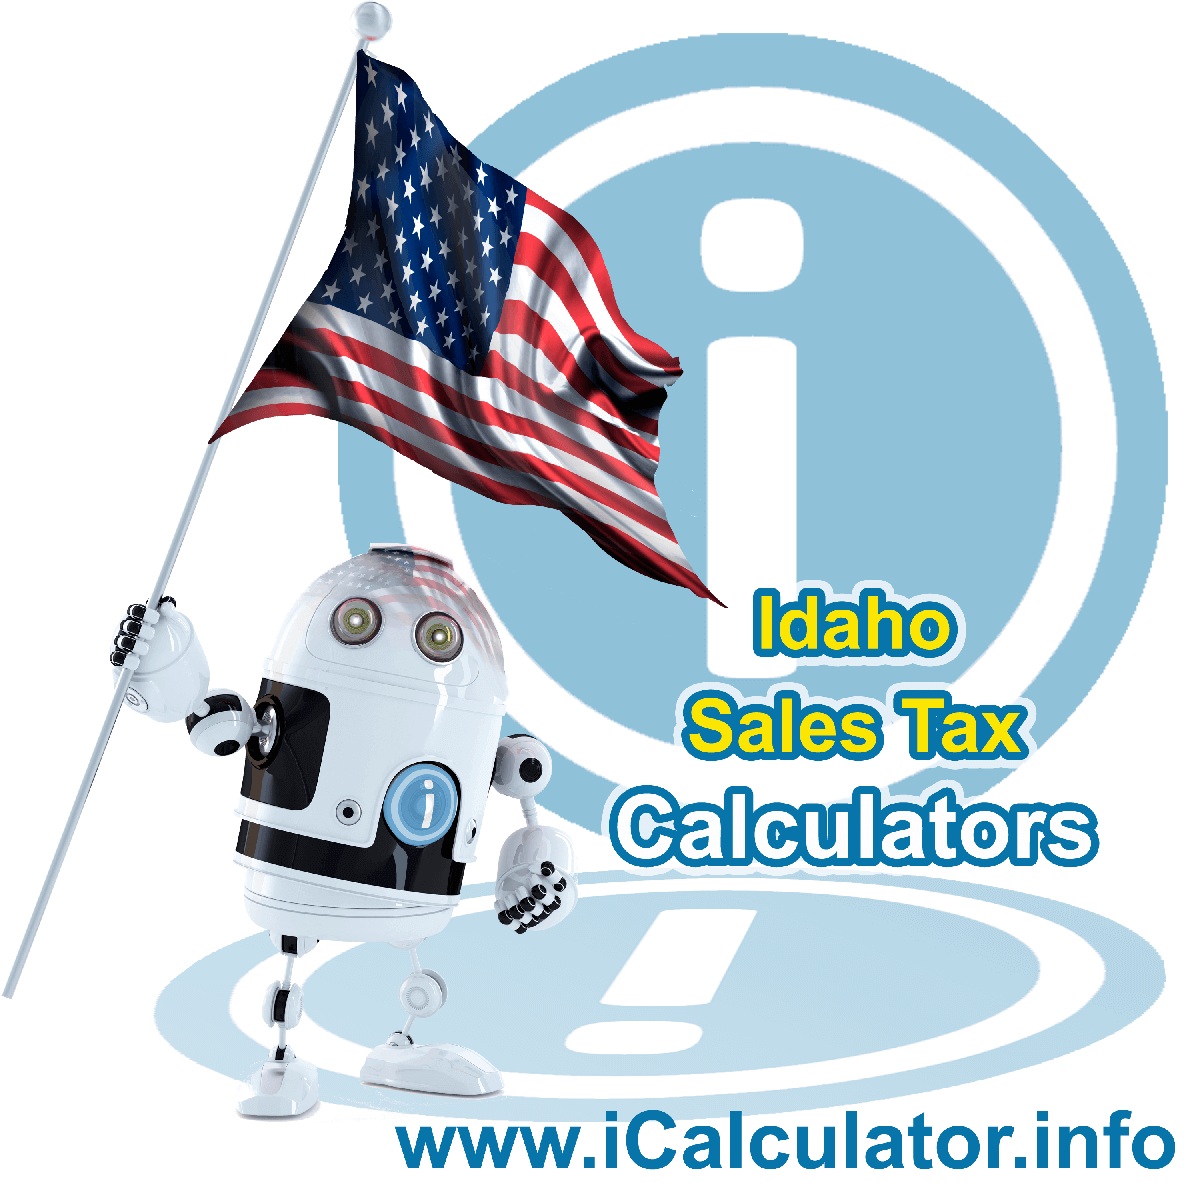 Twin Falls Sales Rates: This image illustrates a calculator robot calculating Twin Falls sales tax manually using the Twin Falls Sales Tax Formula. You can use this information to calculate Twin Falls Sales Tax manually or use the Twin Falls Sales Tax Calculator to calculate sales tax online.